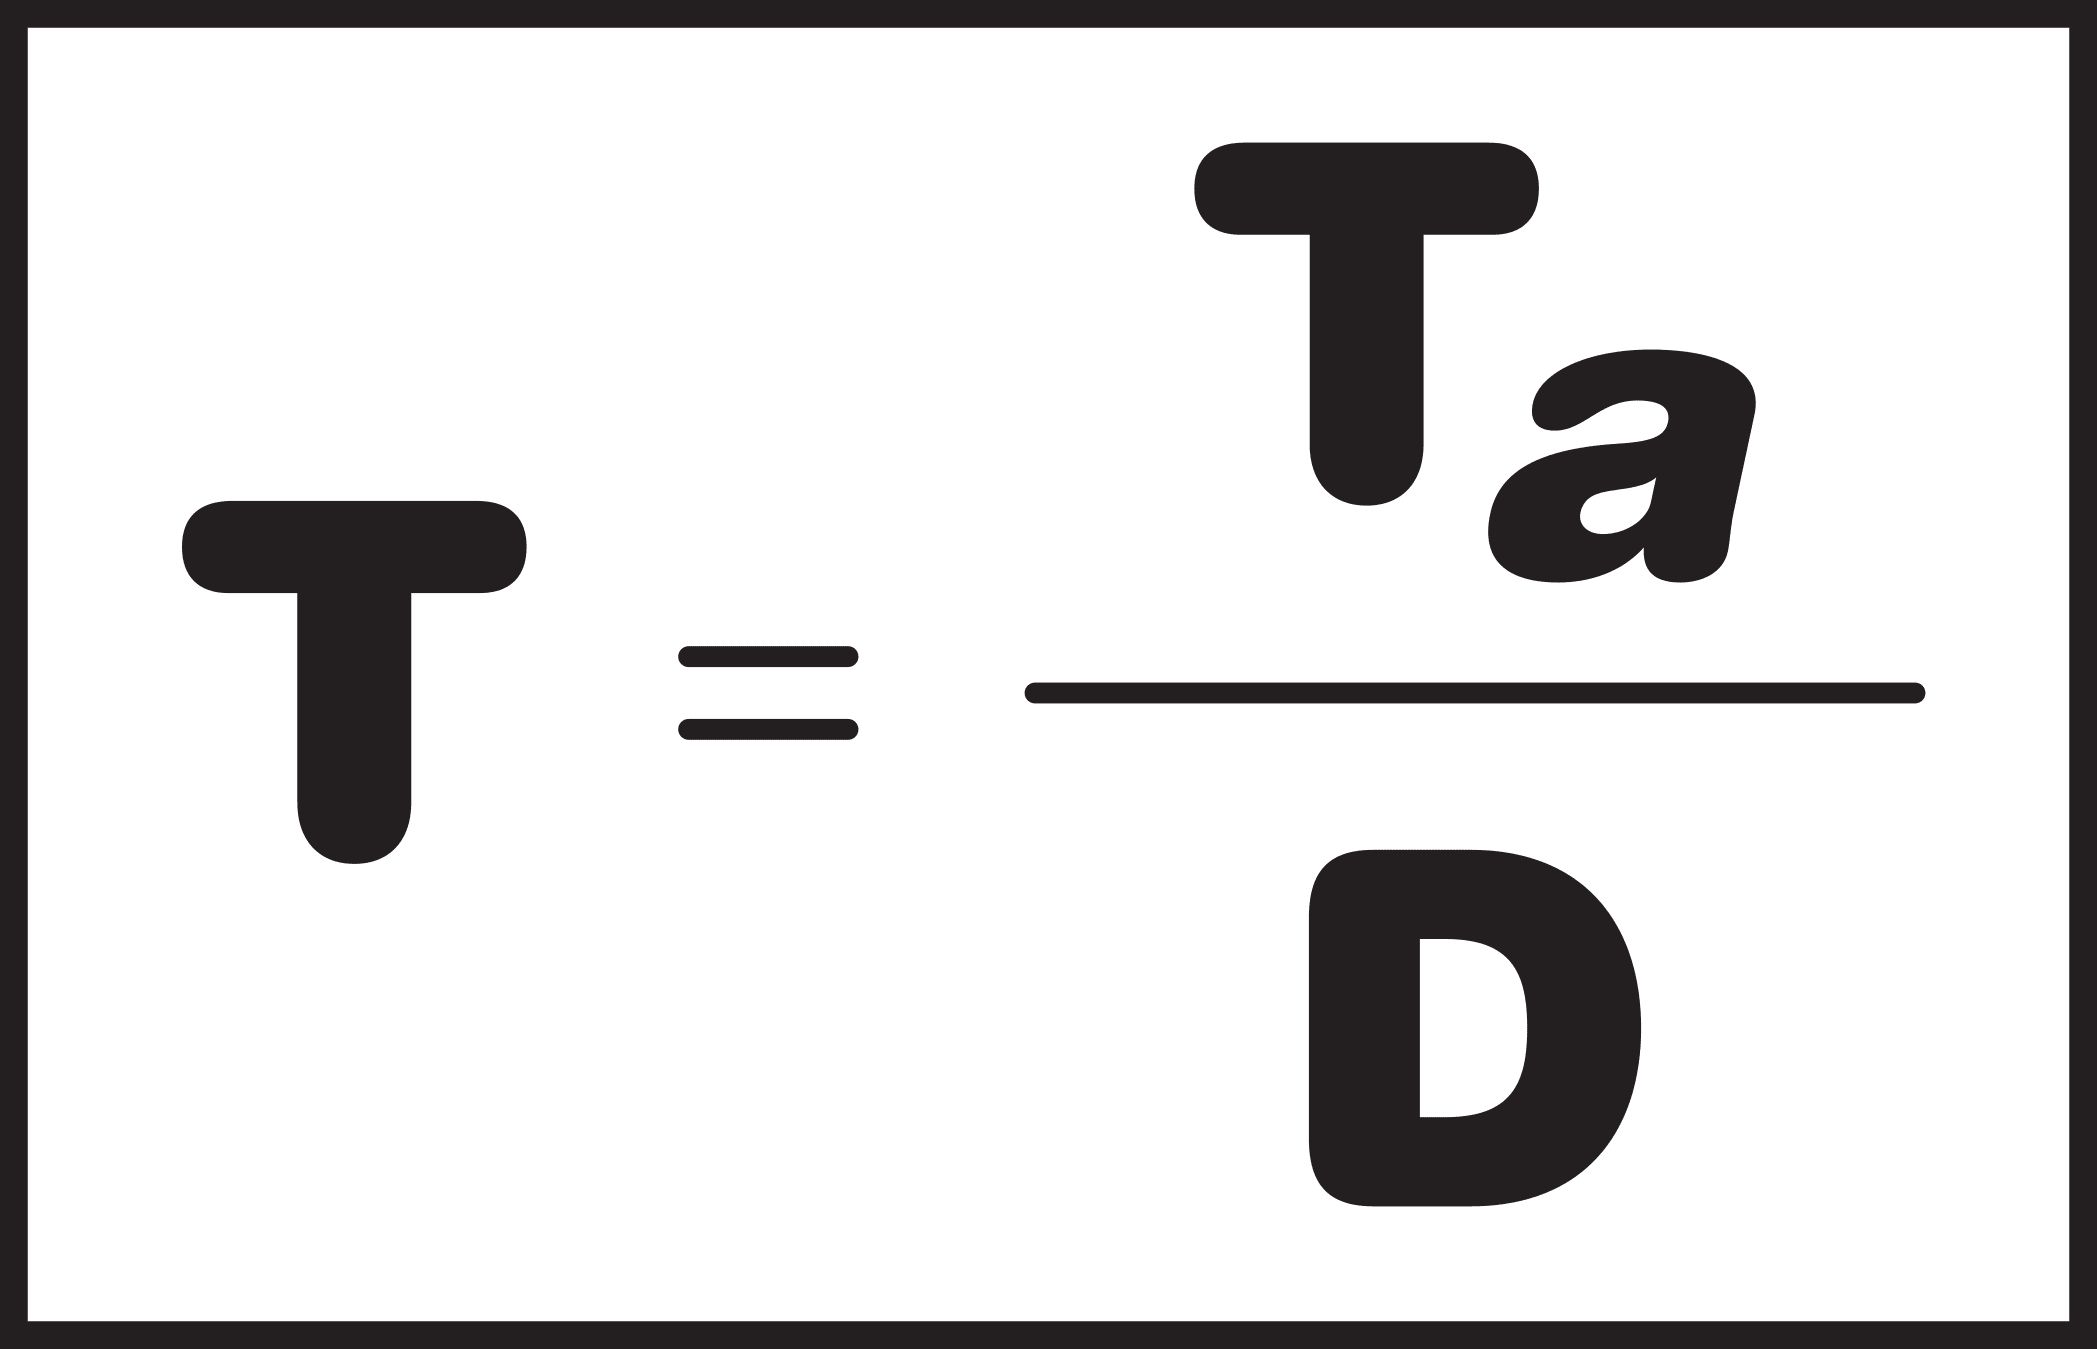 The formula for takt time is T = Ta divided by D.